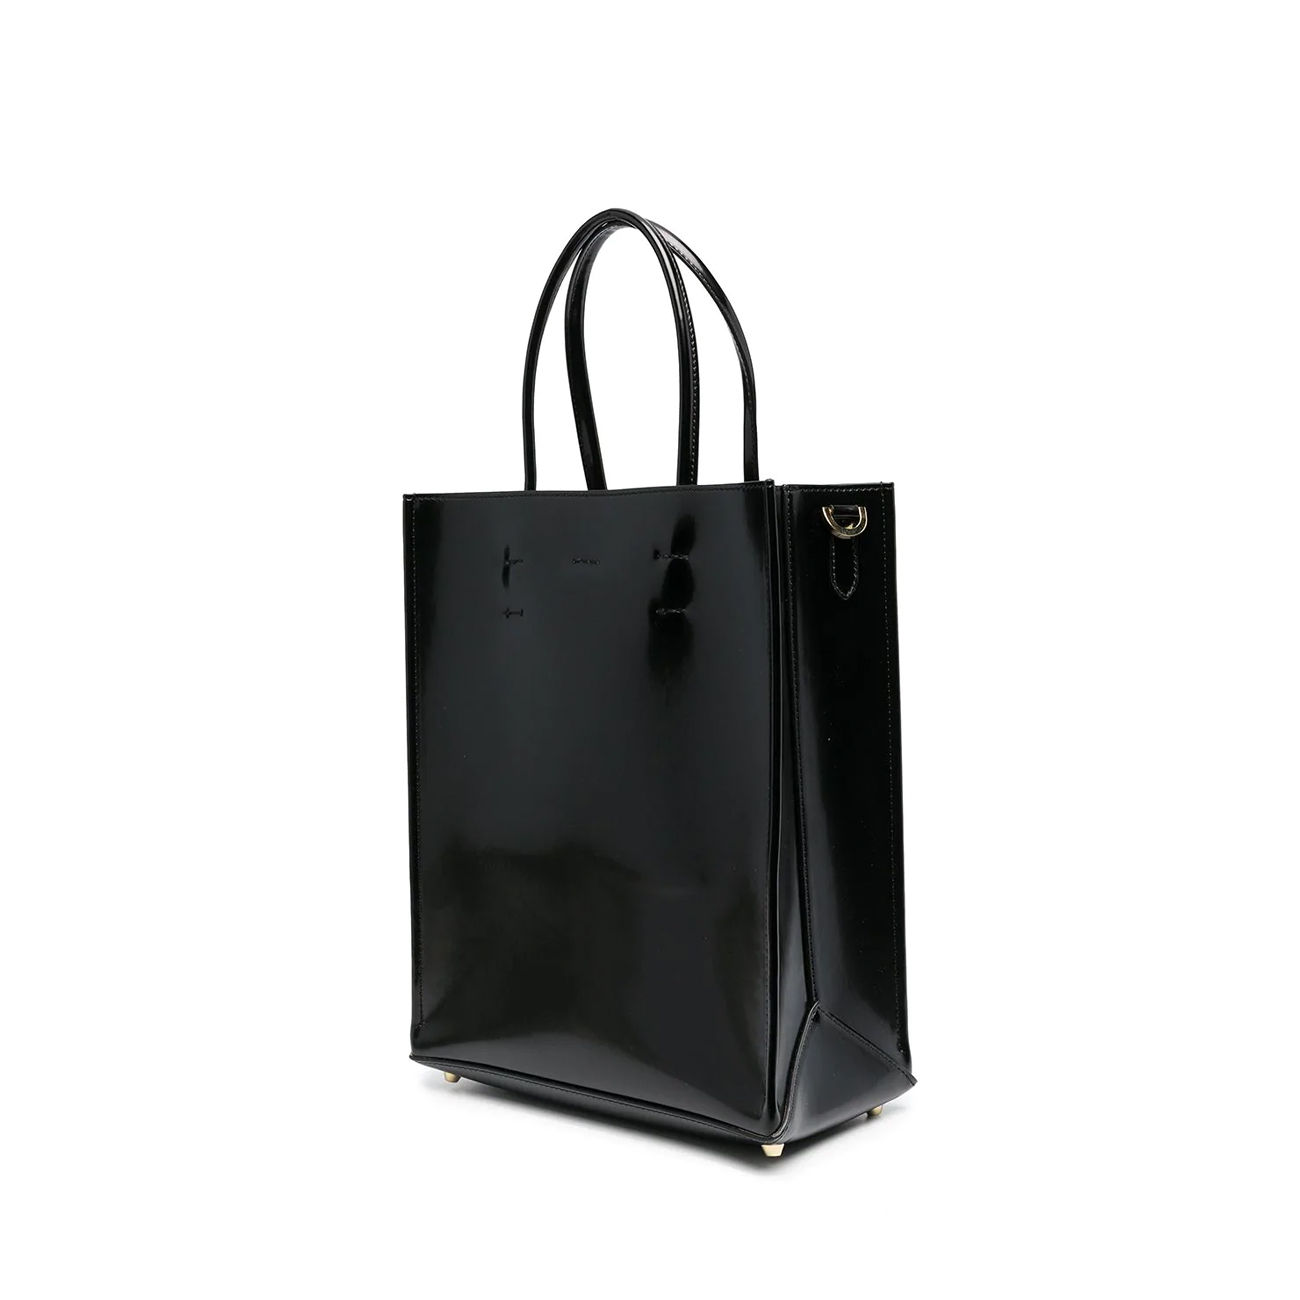 N°21 SMALL FAUX LEATHER SHOPPING BAG WITH LOGO Woman Black